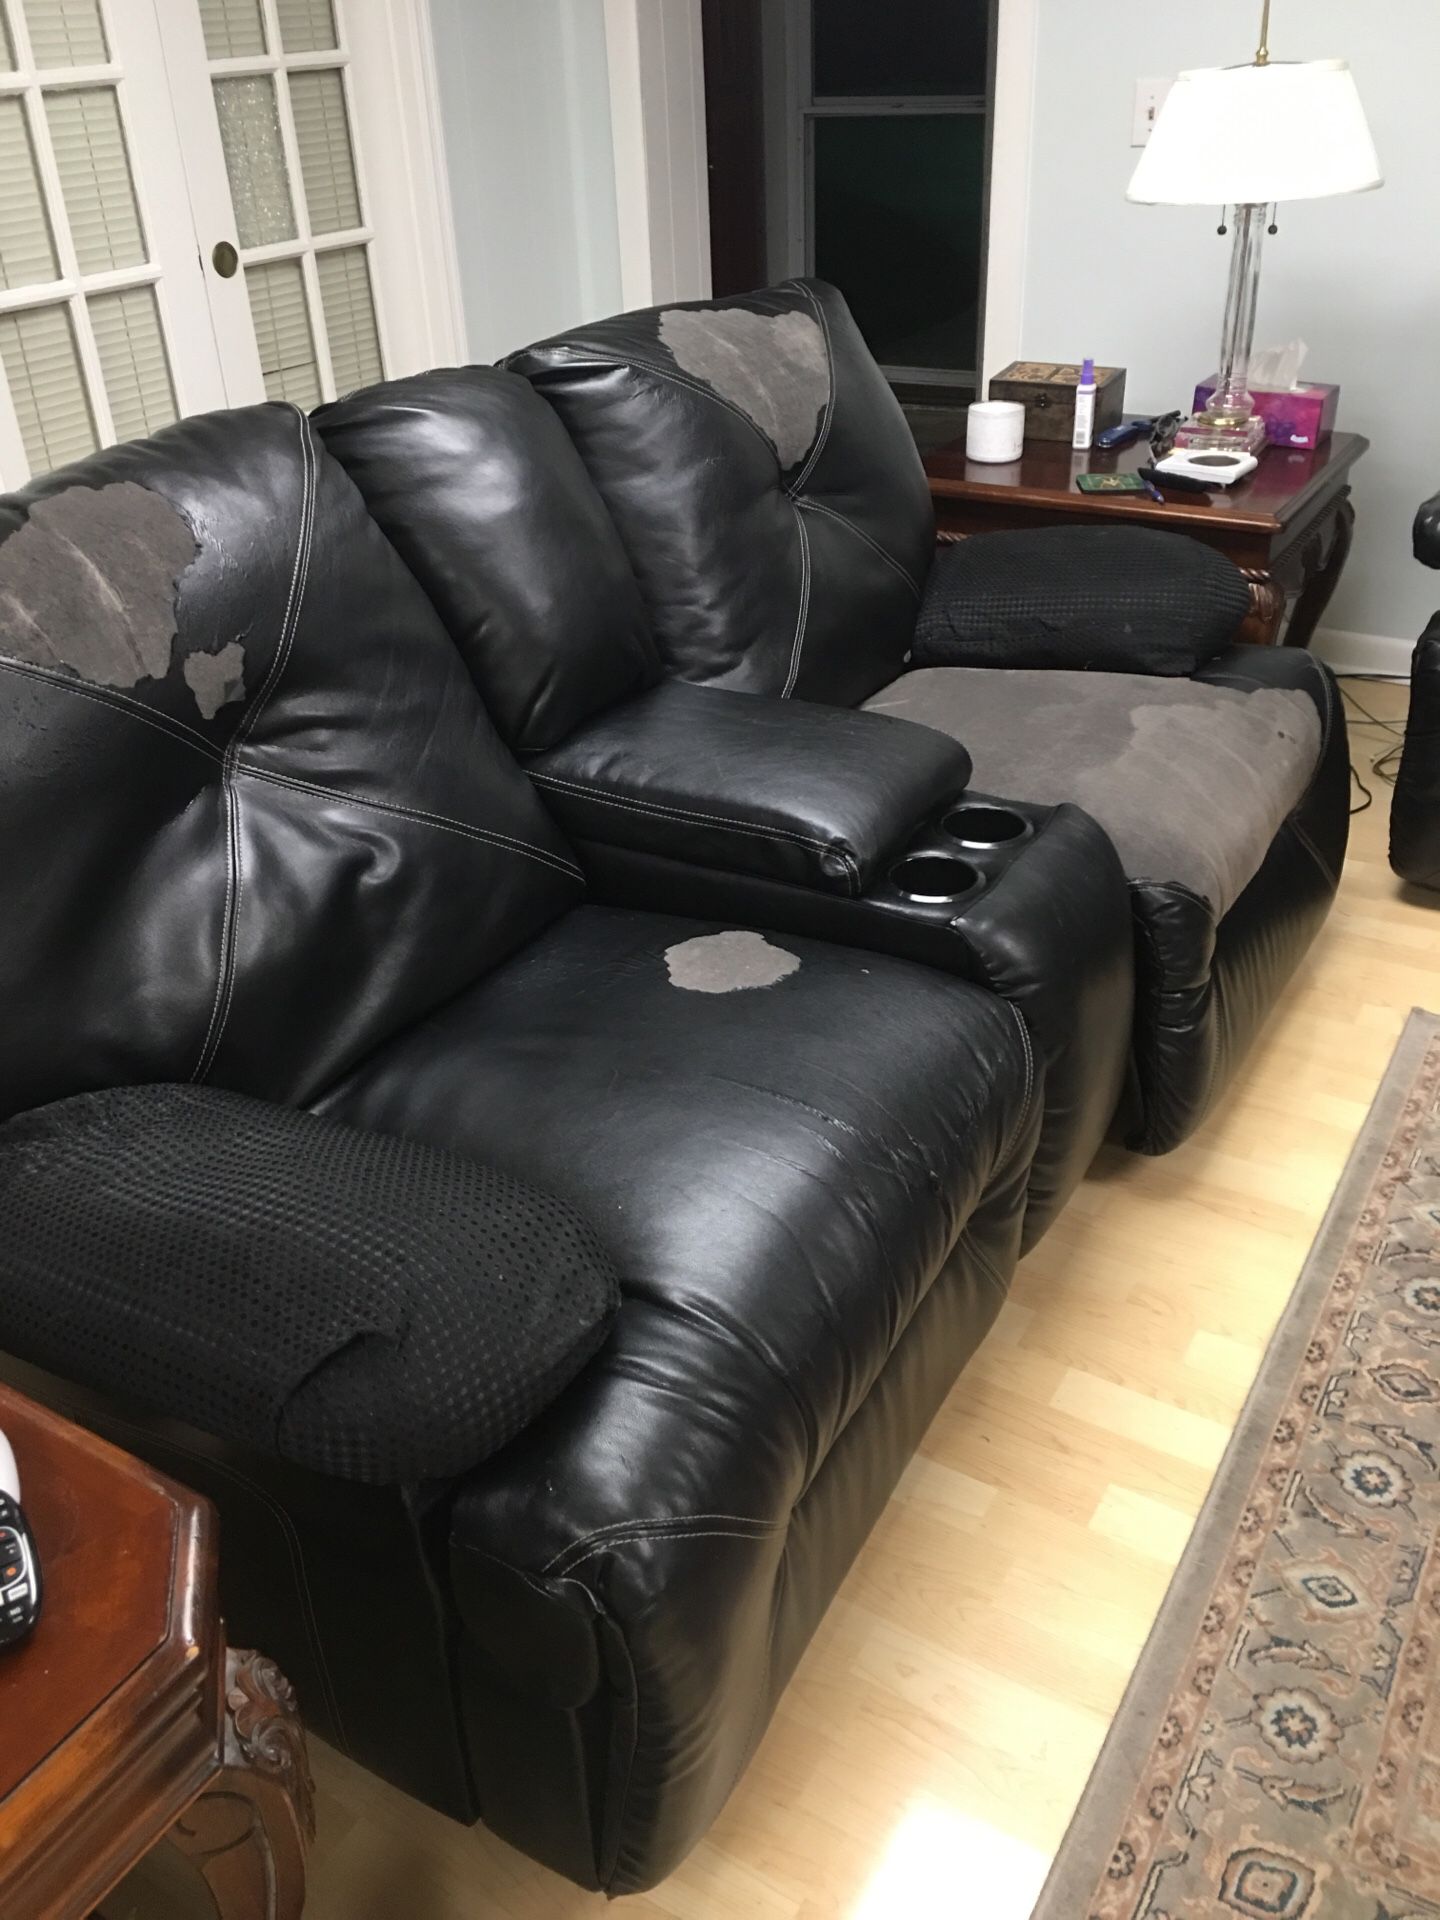 Couch and Love Seat. FREE peeling can cover it